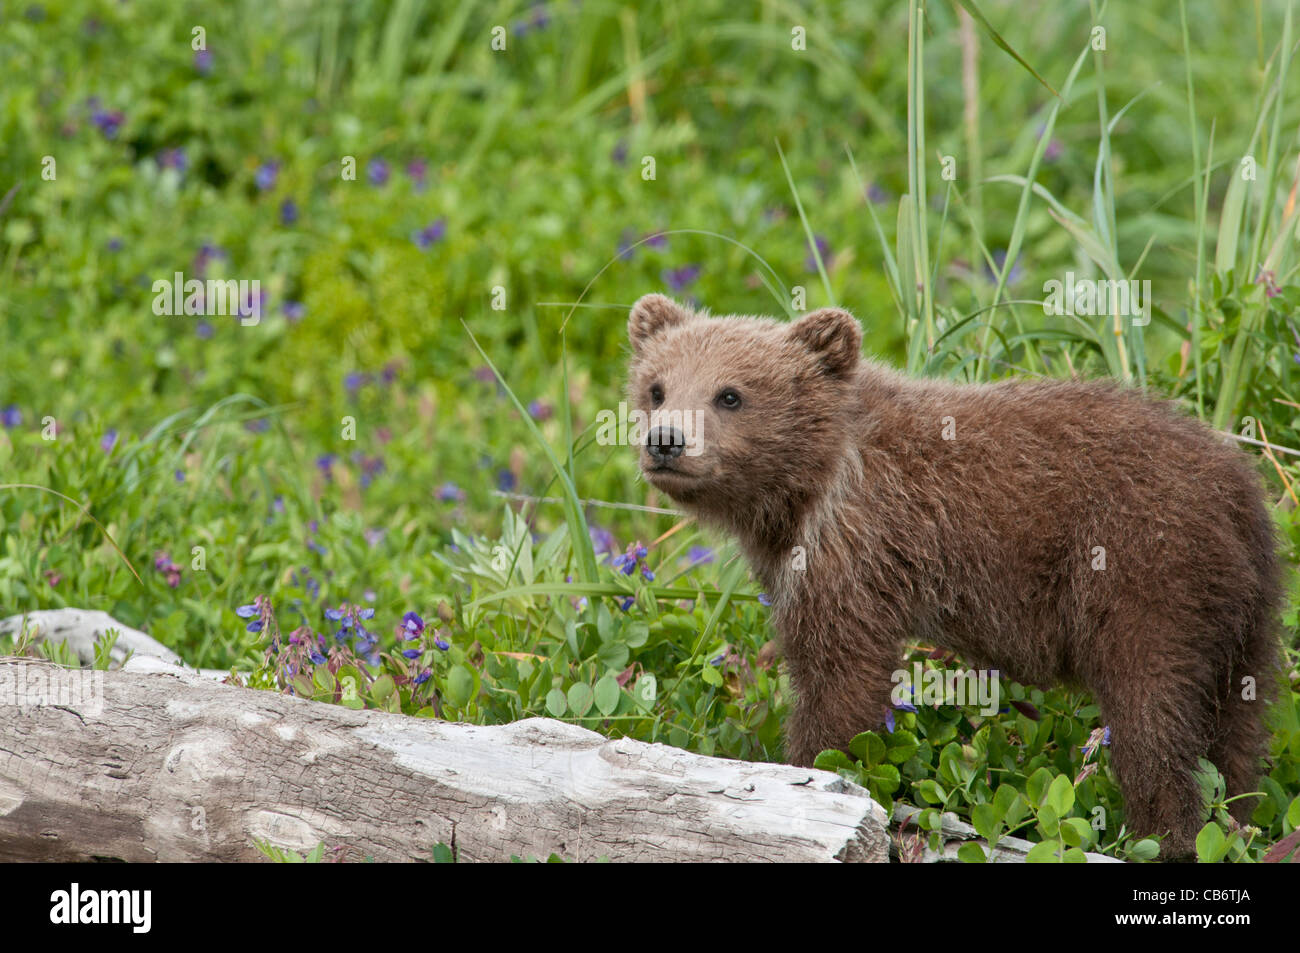 Stock photo of an Alaskan coastal brown bear cub standing in a meadow with purple flowers. Stock Photo